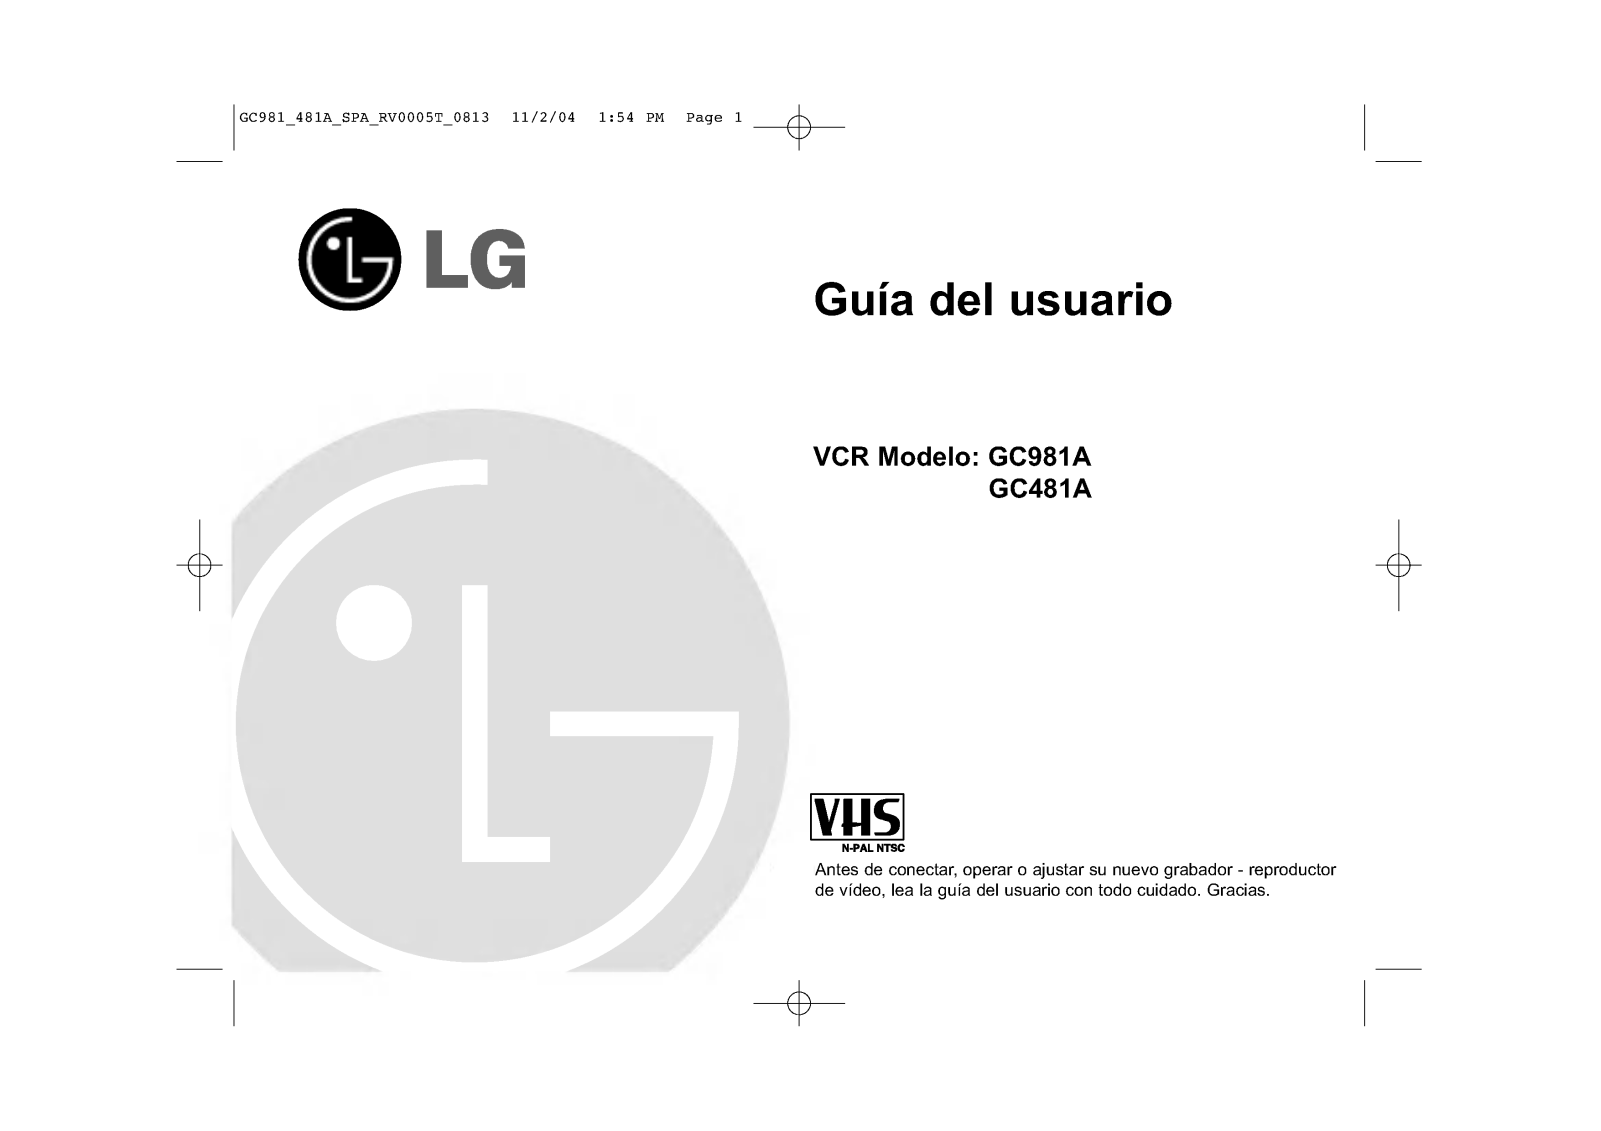 LG GC481A User Guide